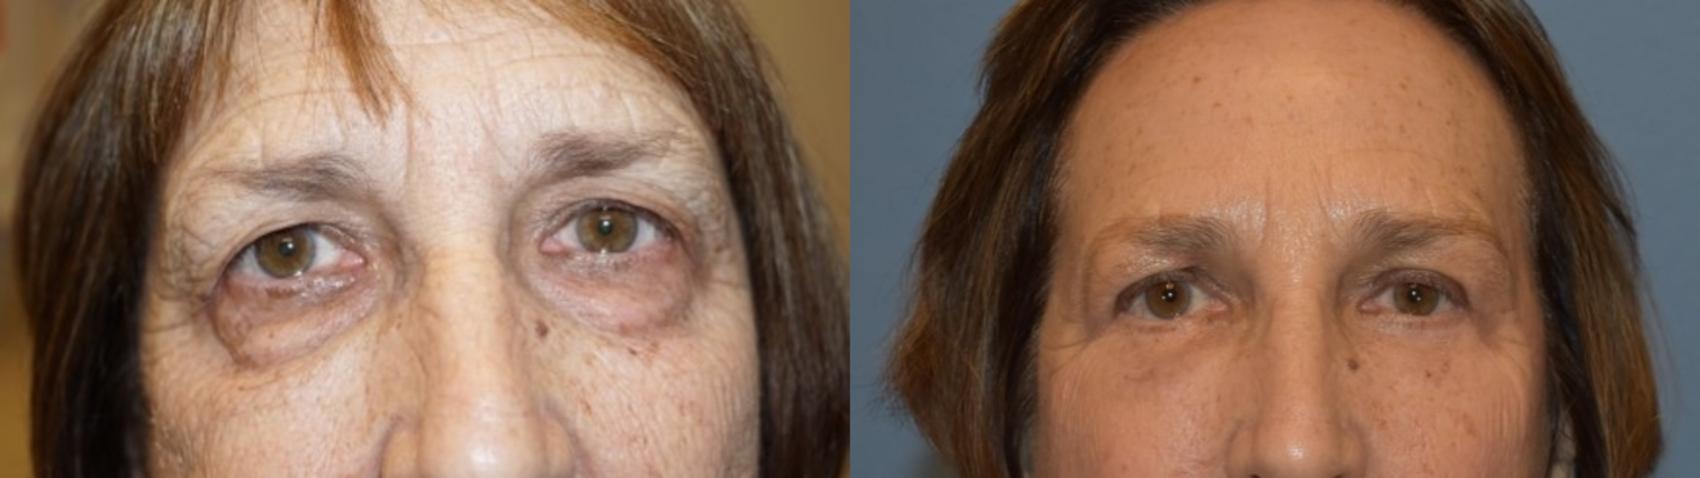 Brow Lift Before & After Photo | San Francisco, CA | Kaiser Permanente Cosmetic Services